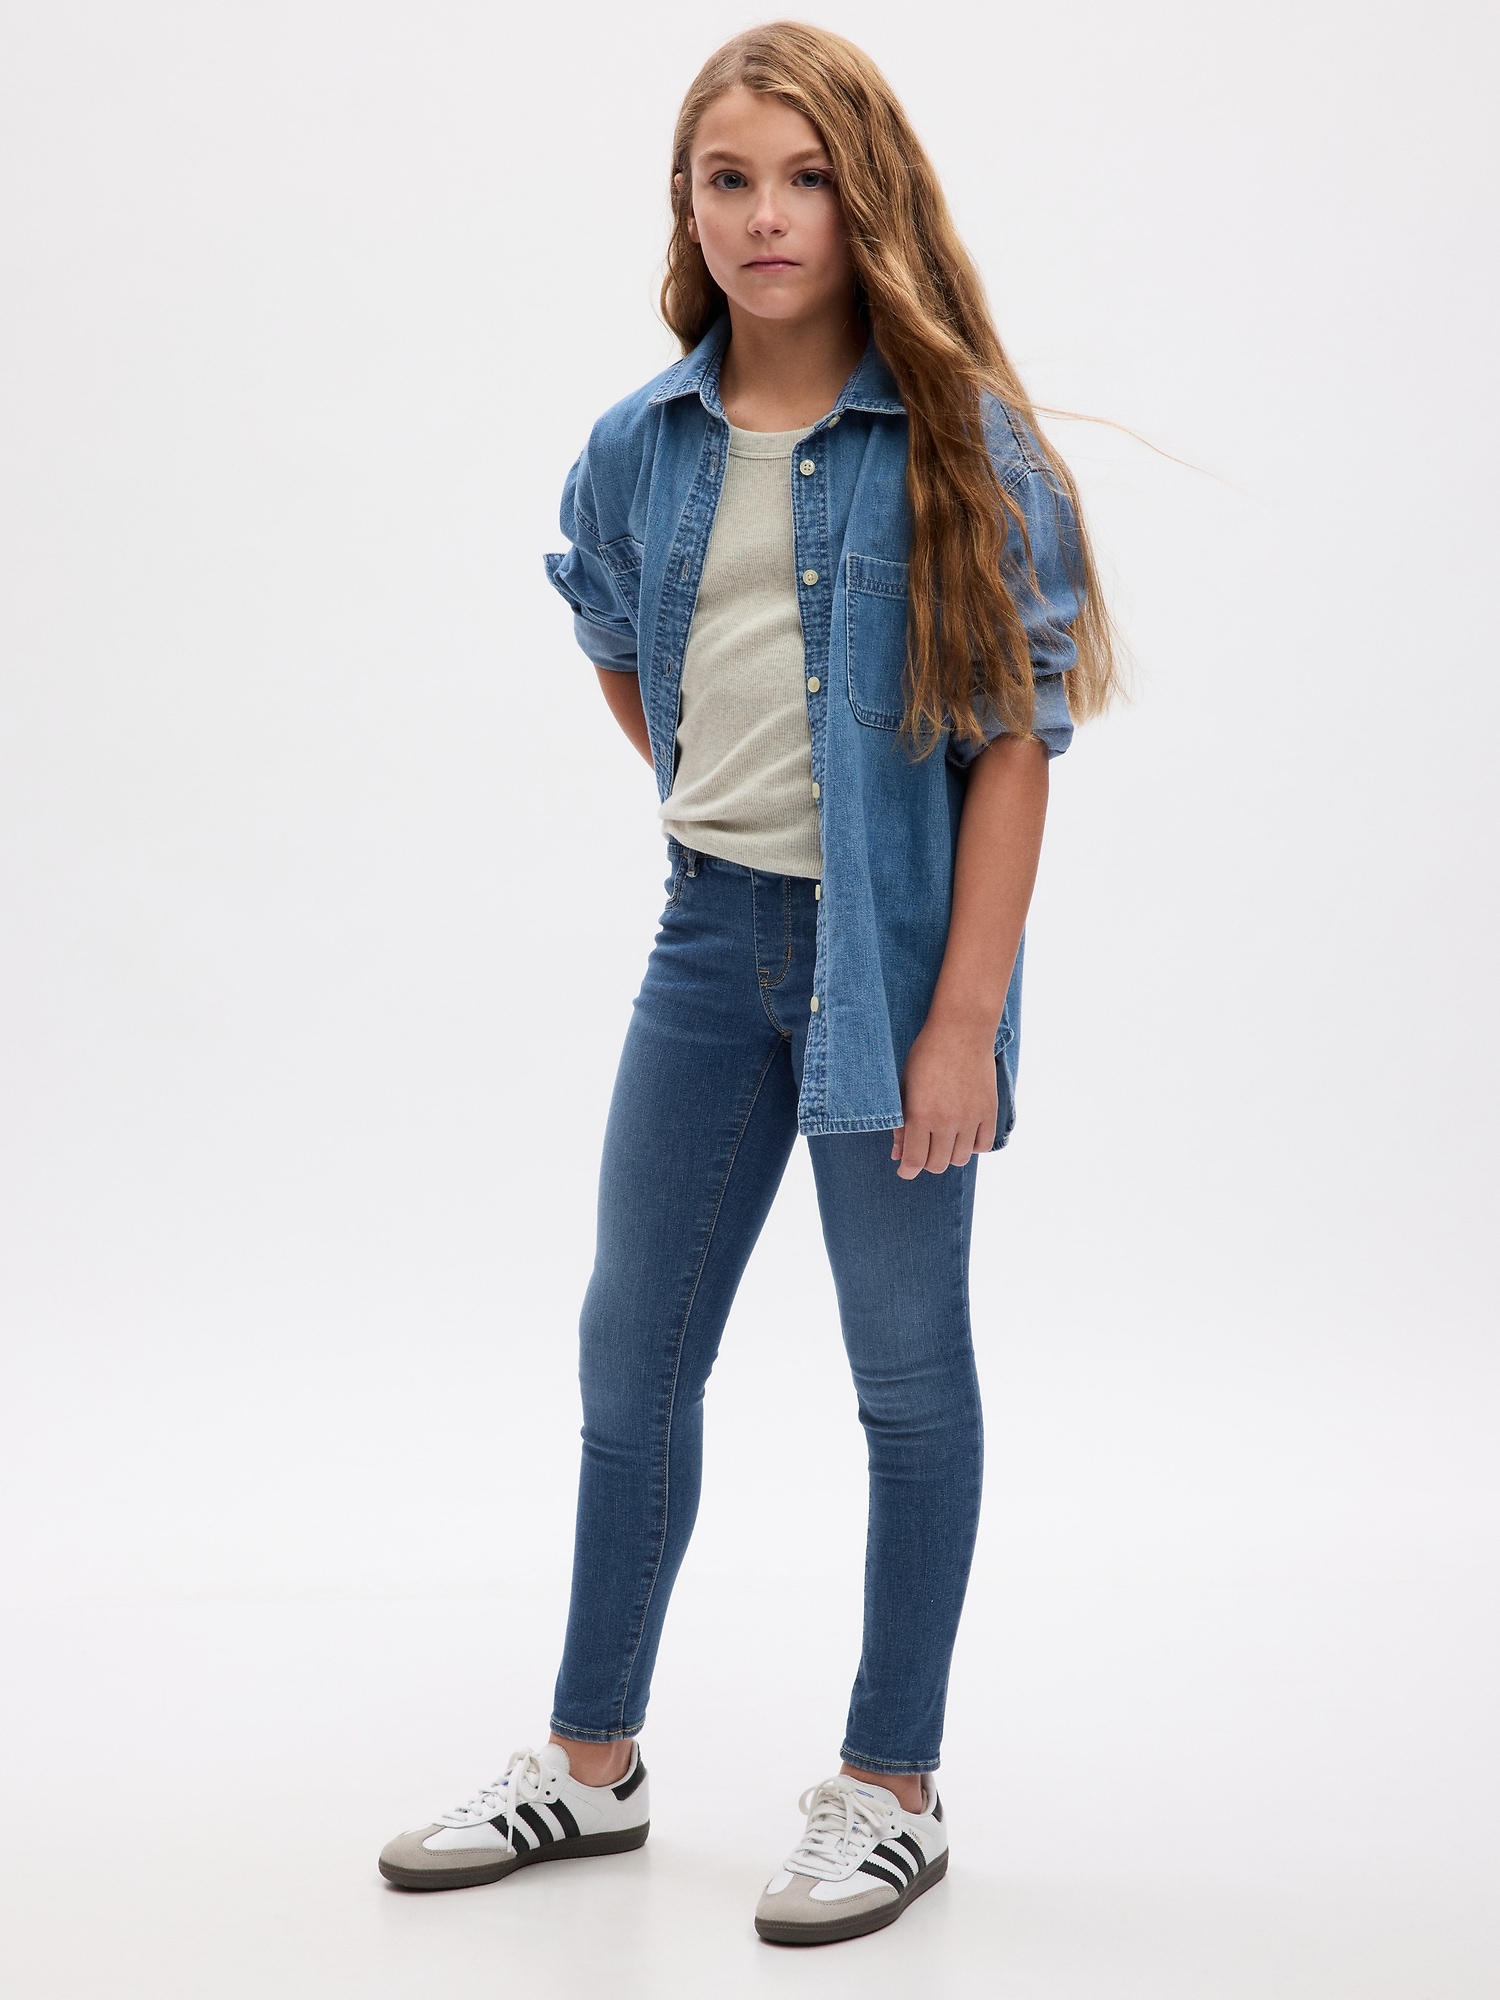 Stretchy blue jeggings 7-8y – Canopy Kids